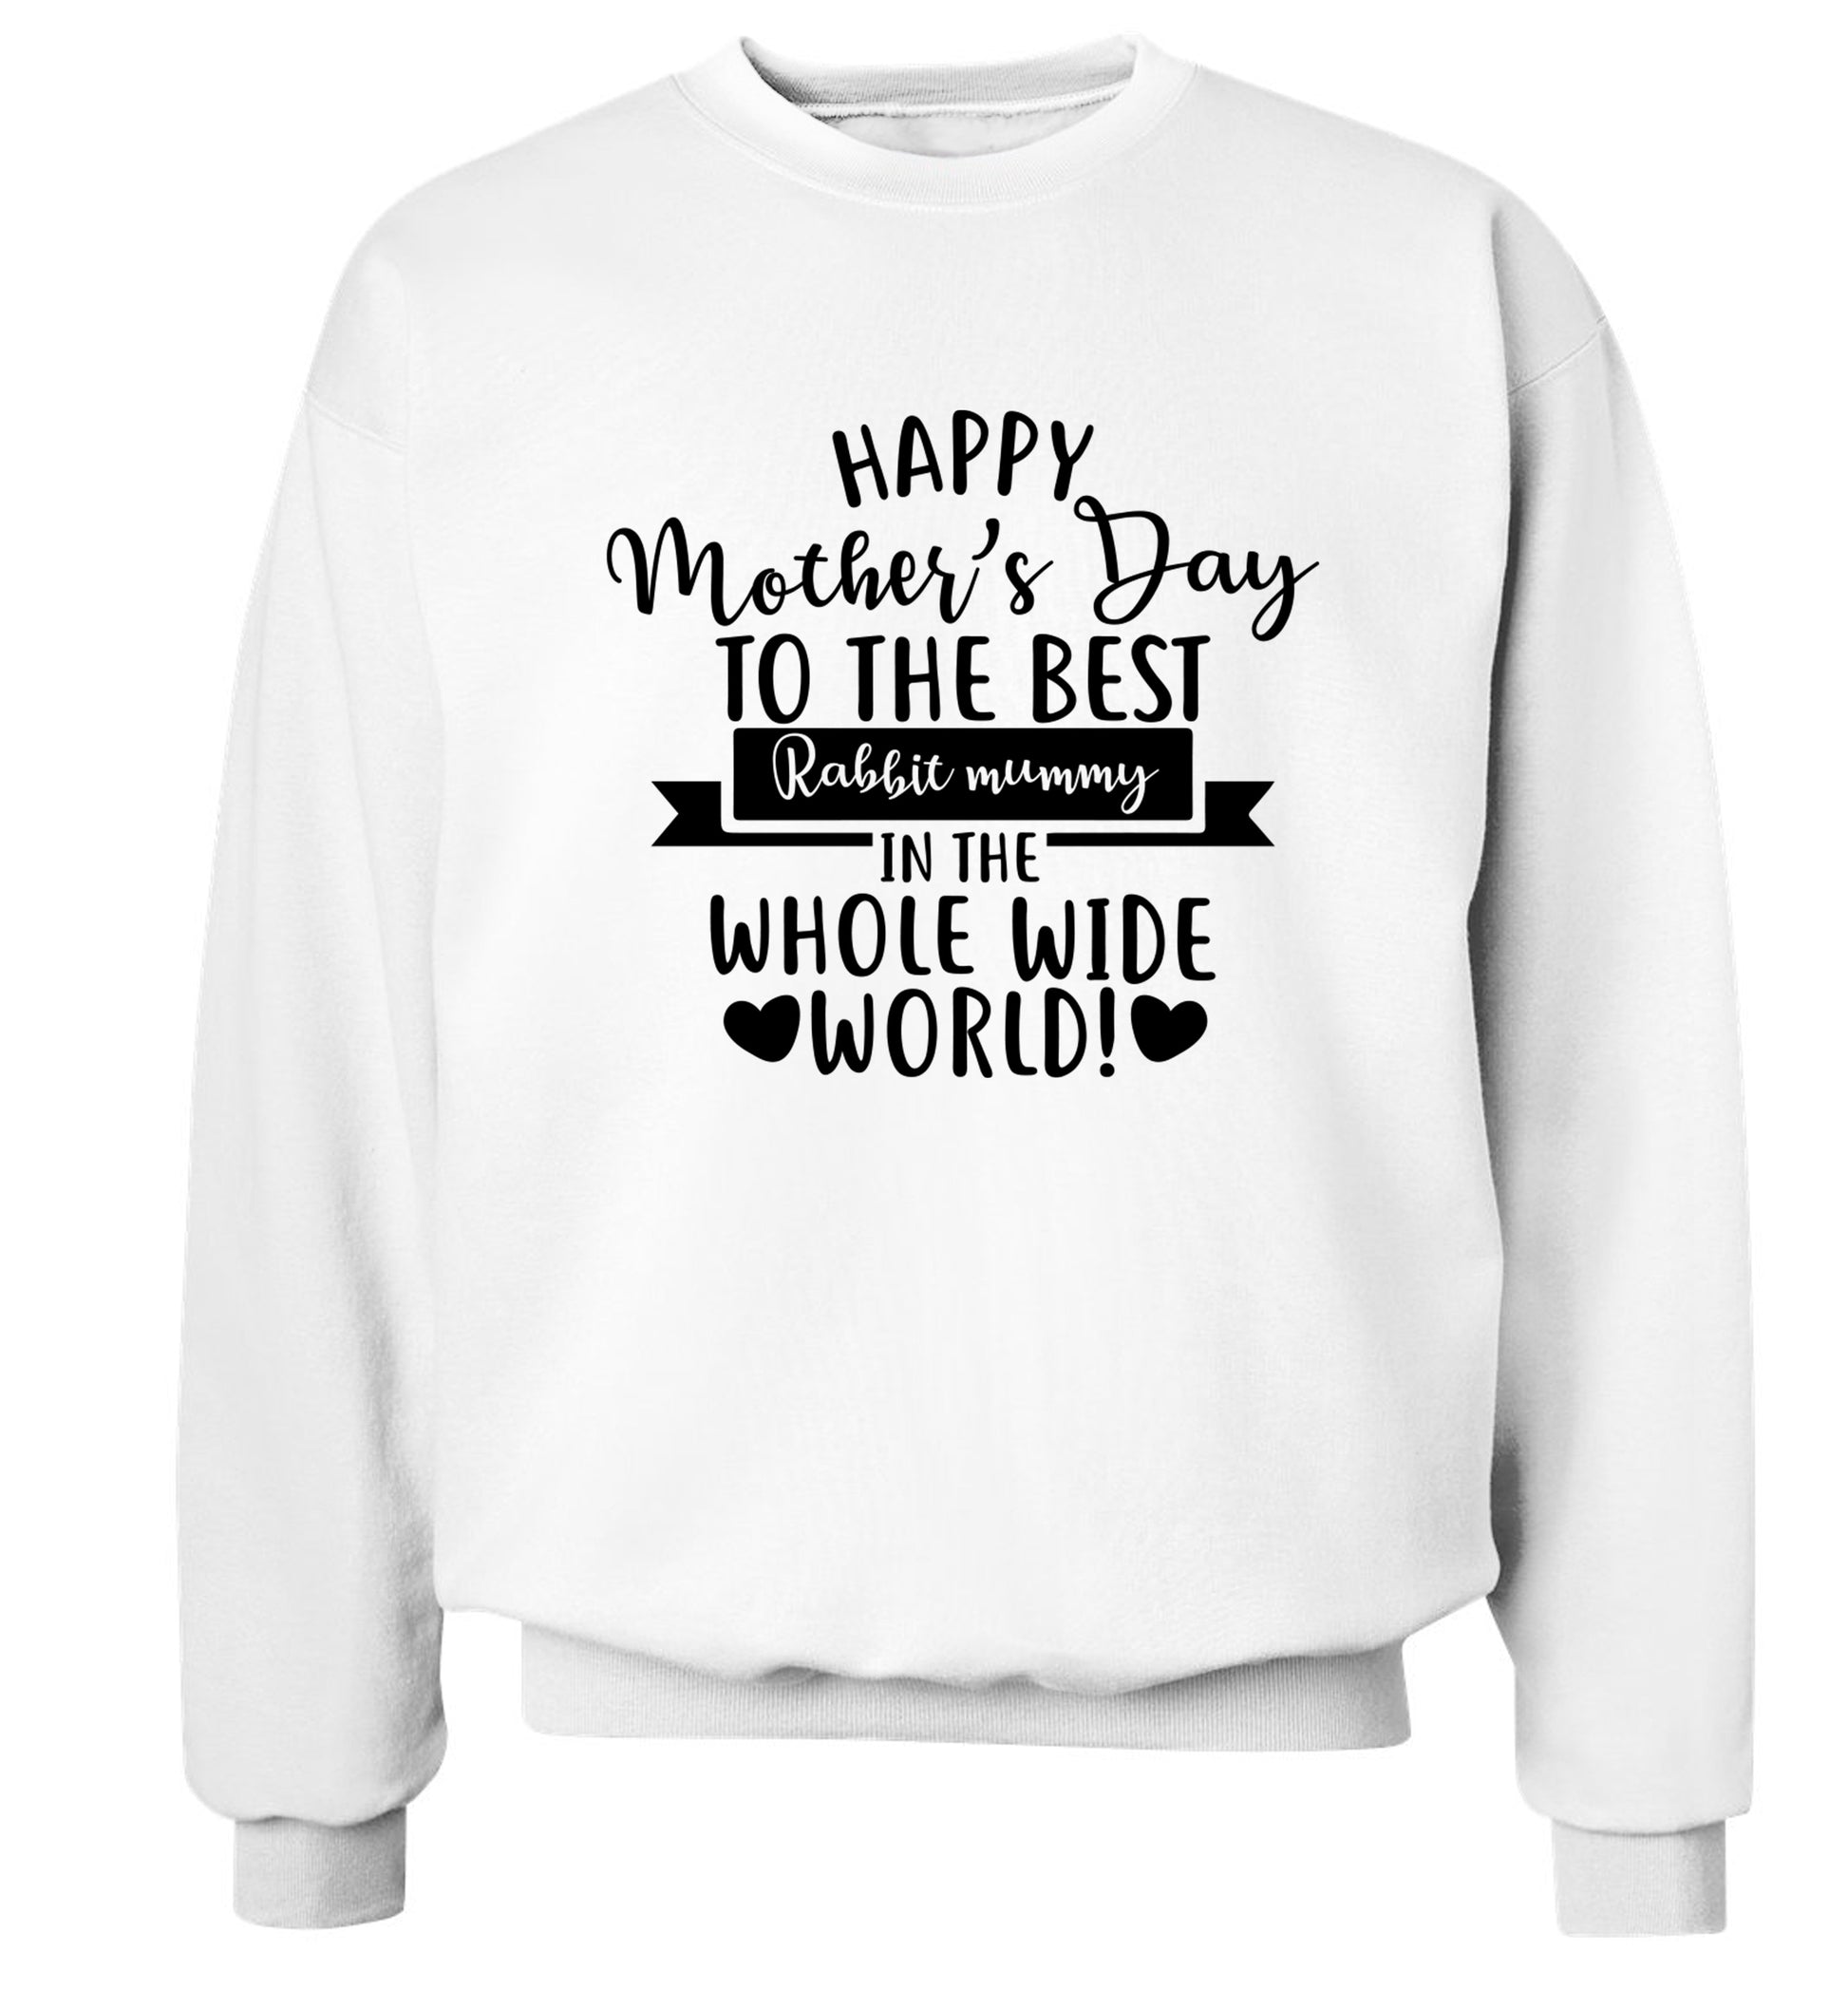 Happy mother's day to the best rabbit mummy in the world Adult's unisex white Sweater 2XL